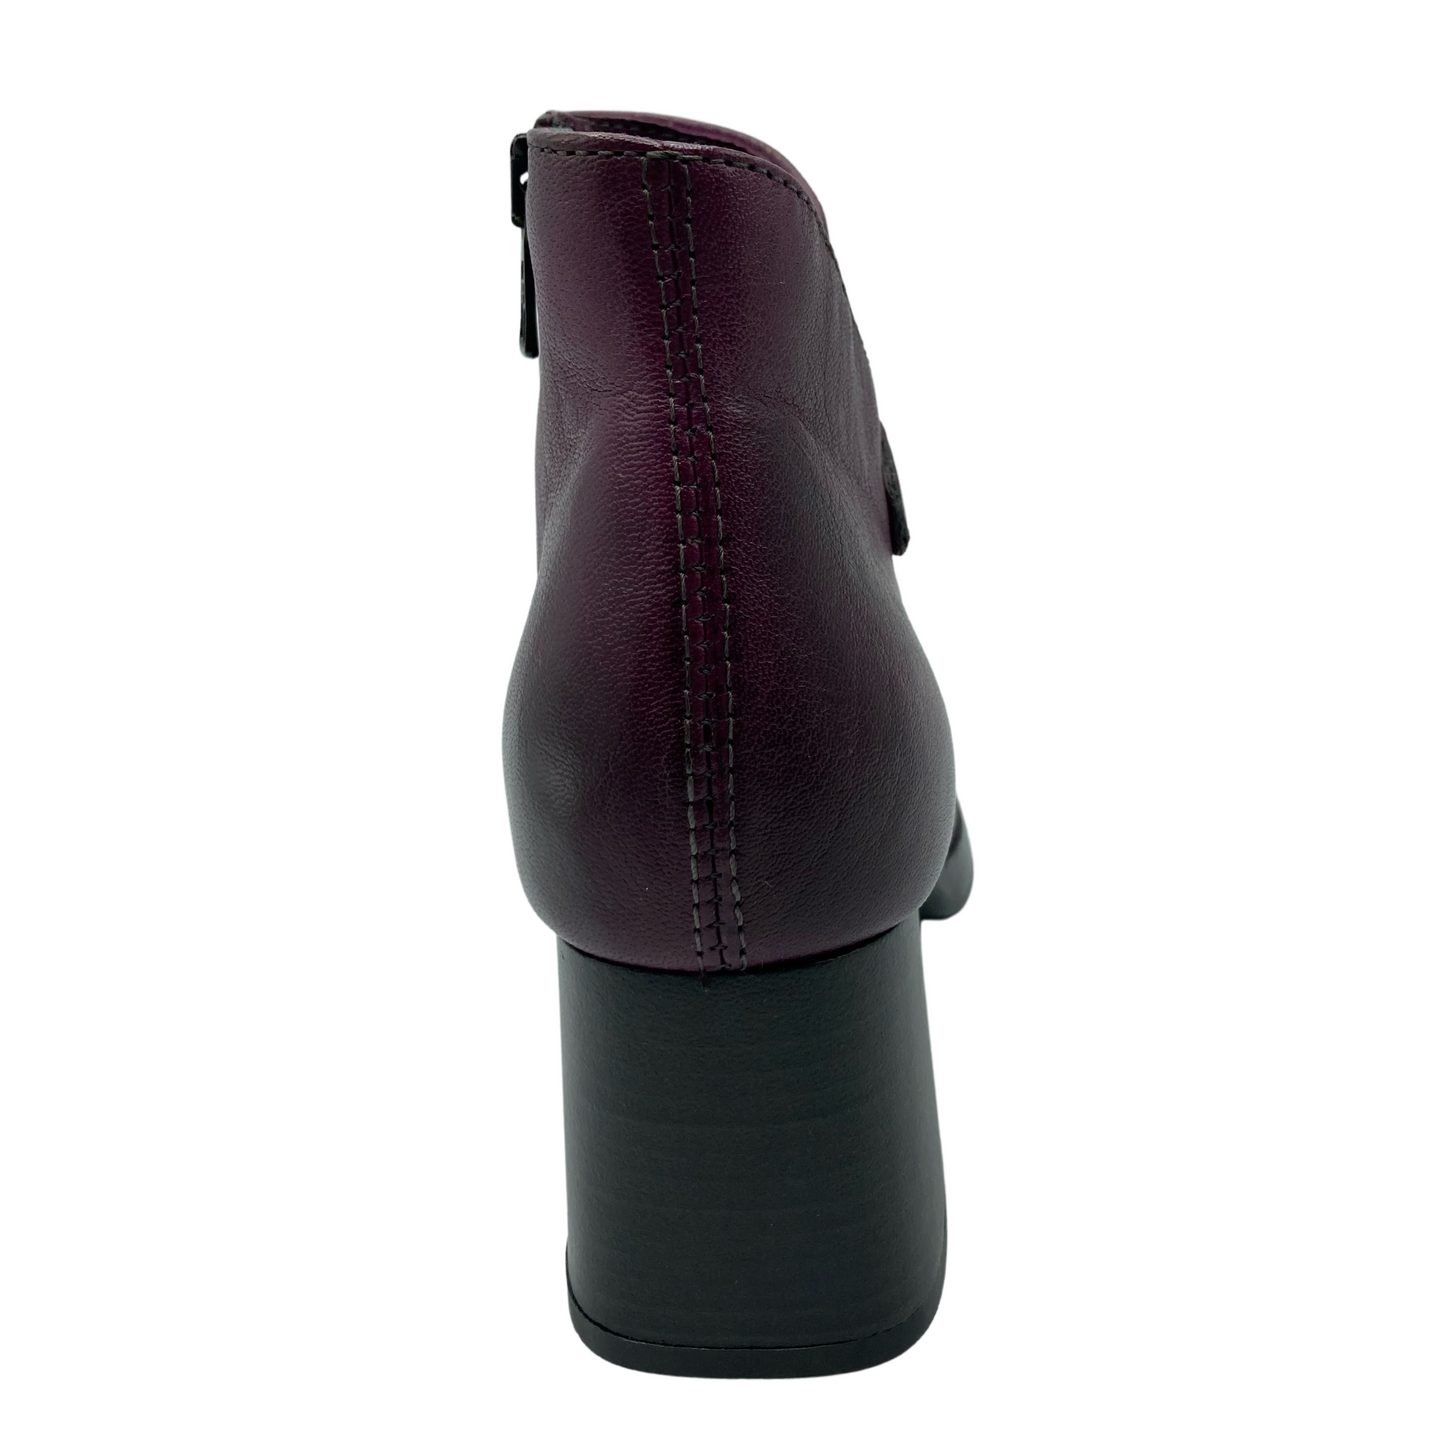 Heel view of purple ankle boot with chunky black heel and stitching detail along the back